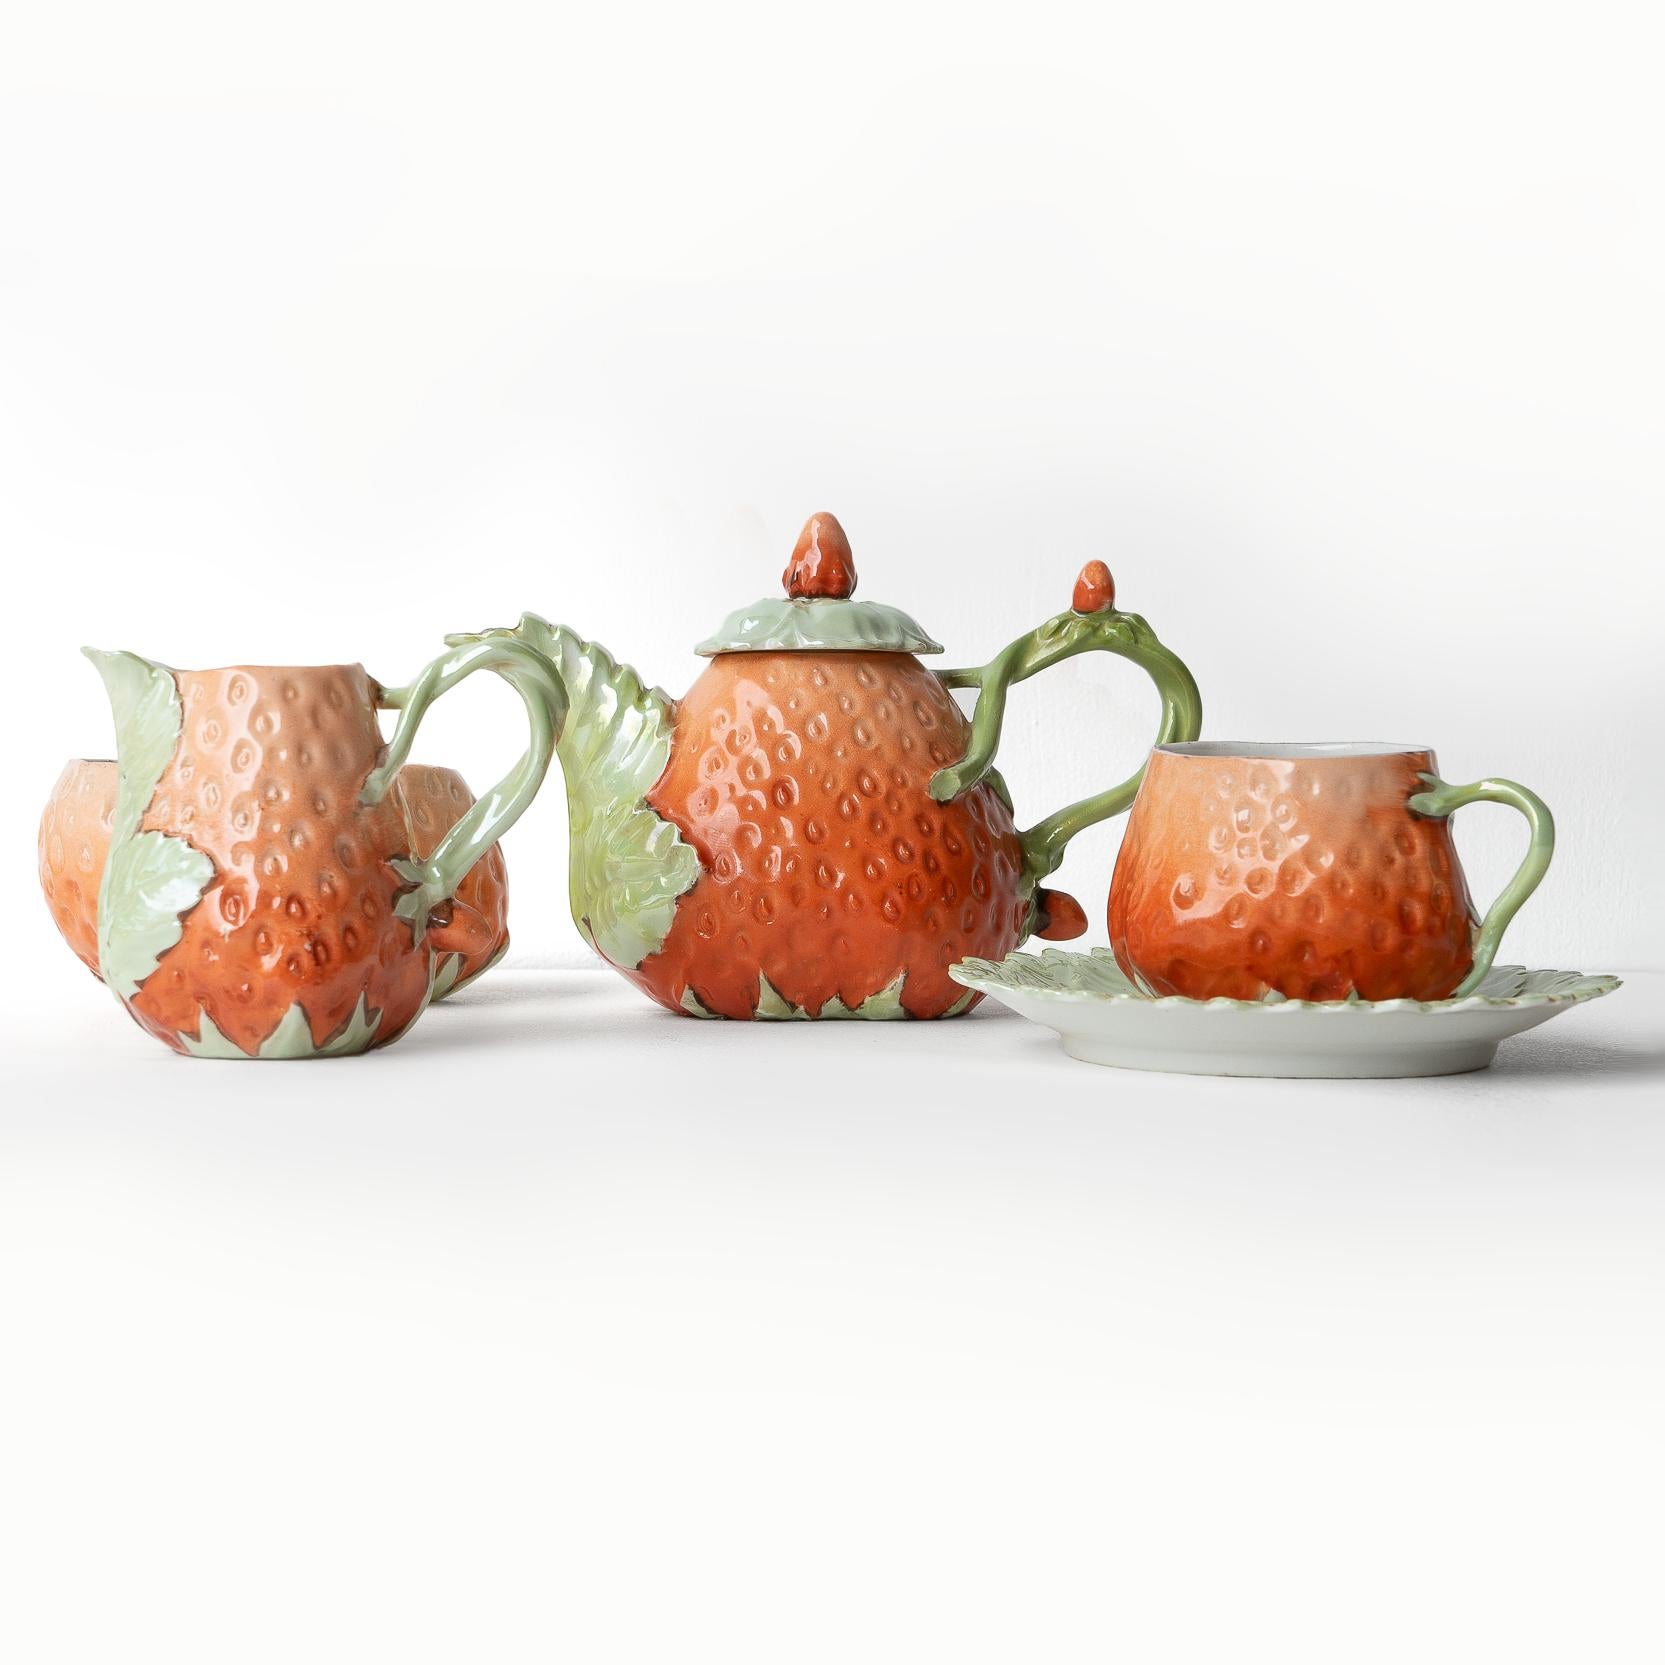 ANTIQUE TEA SET
The most charming little tea set for one, consisting of a teapot and cover, milk jug, sugar bowl and a cup and saucer.

Modelled in the form of strawberries and their foliage.

Dating from the early 20th century, circa 1920 in date